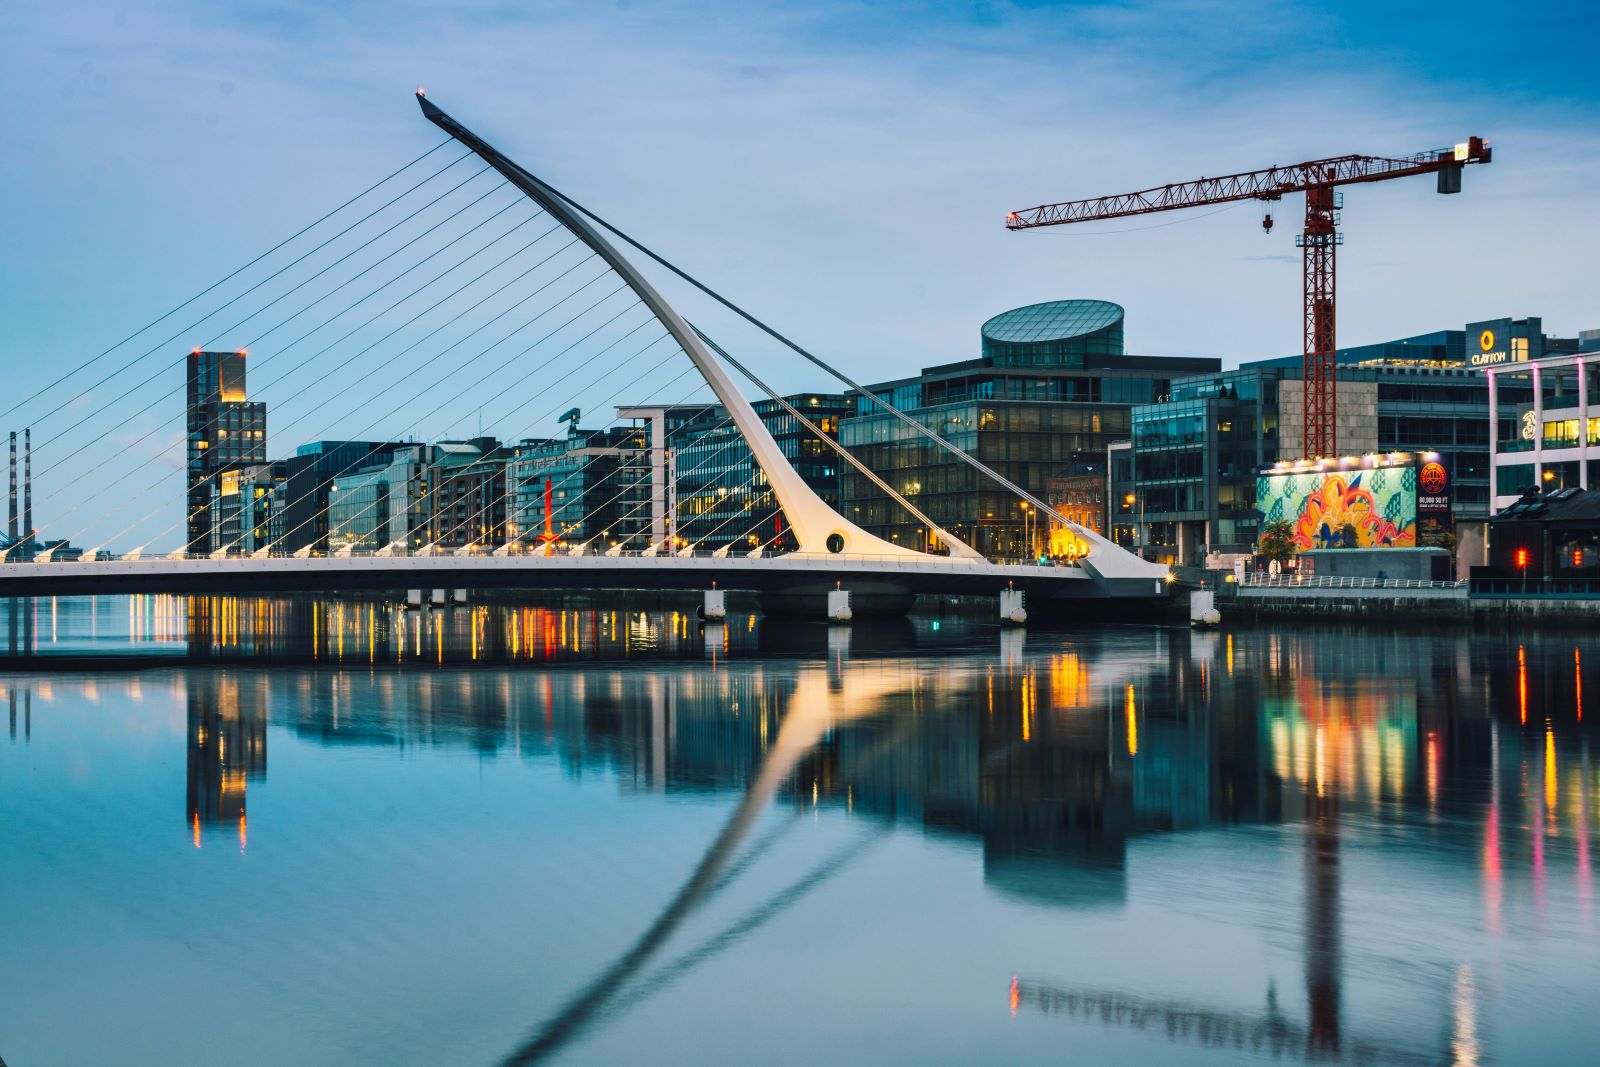 <p class="wp-caption-text">Image Credit: Pexel / Luciann Photography</p>  <p>Take a walk along the River Liffey, which slices Dublin into north and south. The riverside is dotted with landmarks and bridges, including the famous Ha’penny Bridge.</p>